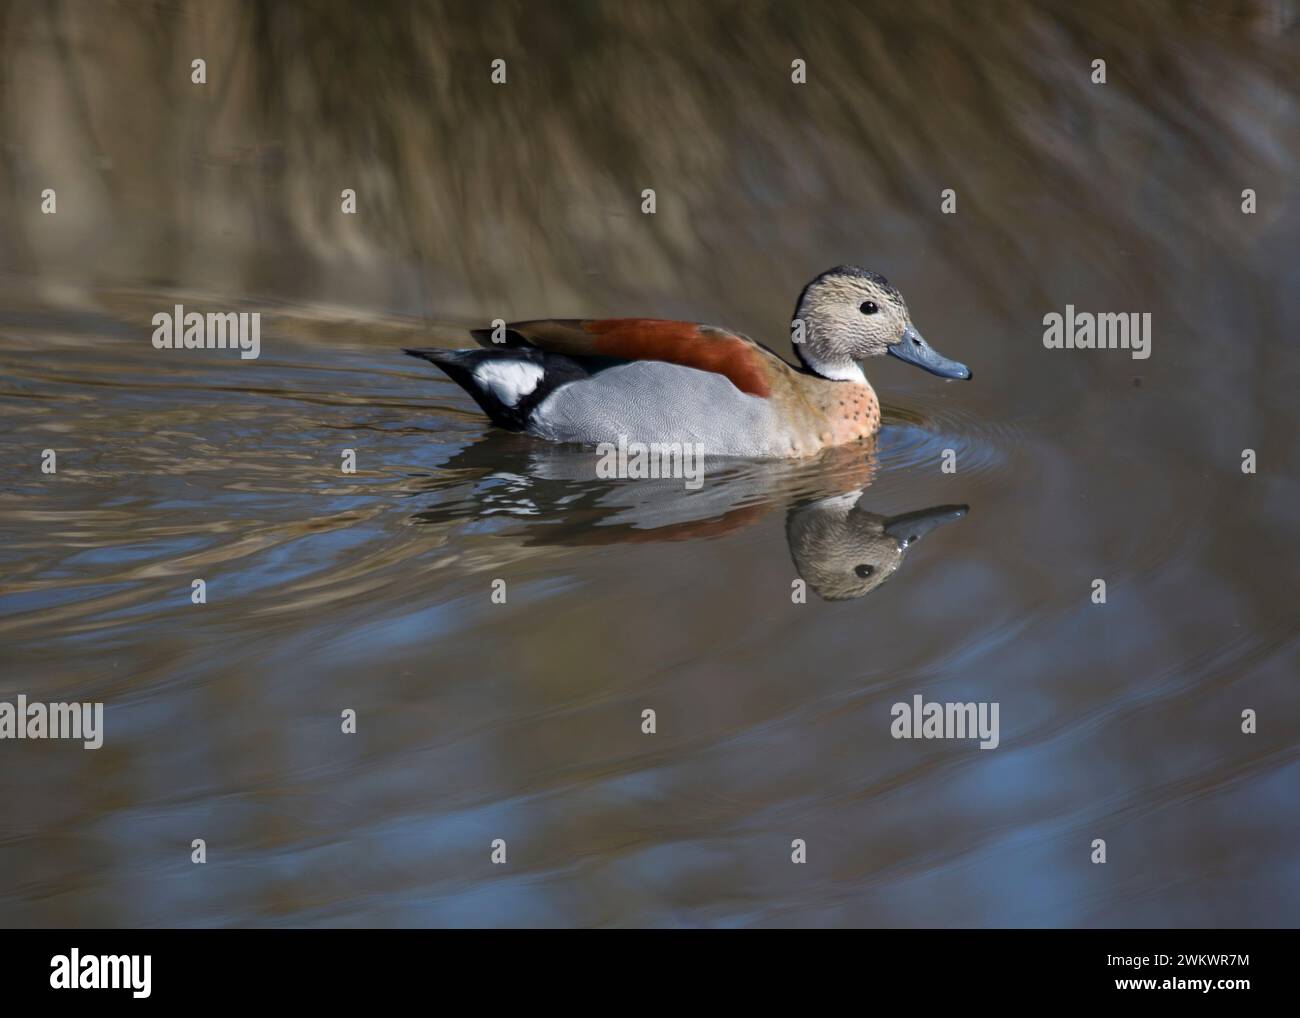 Ringed Teal Duck spotted in the wilds of Africa Stock Photo